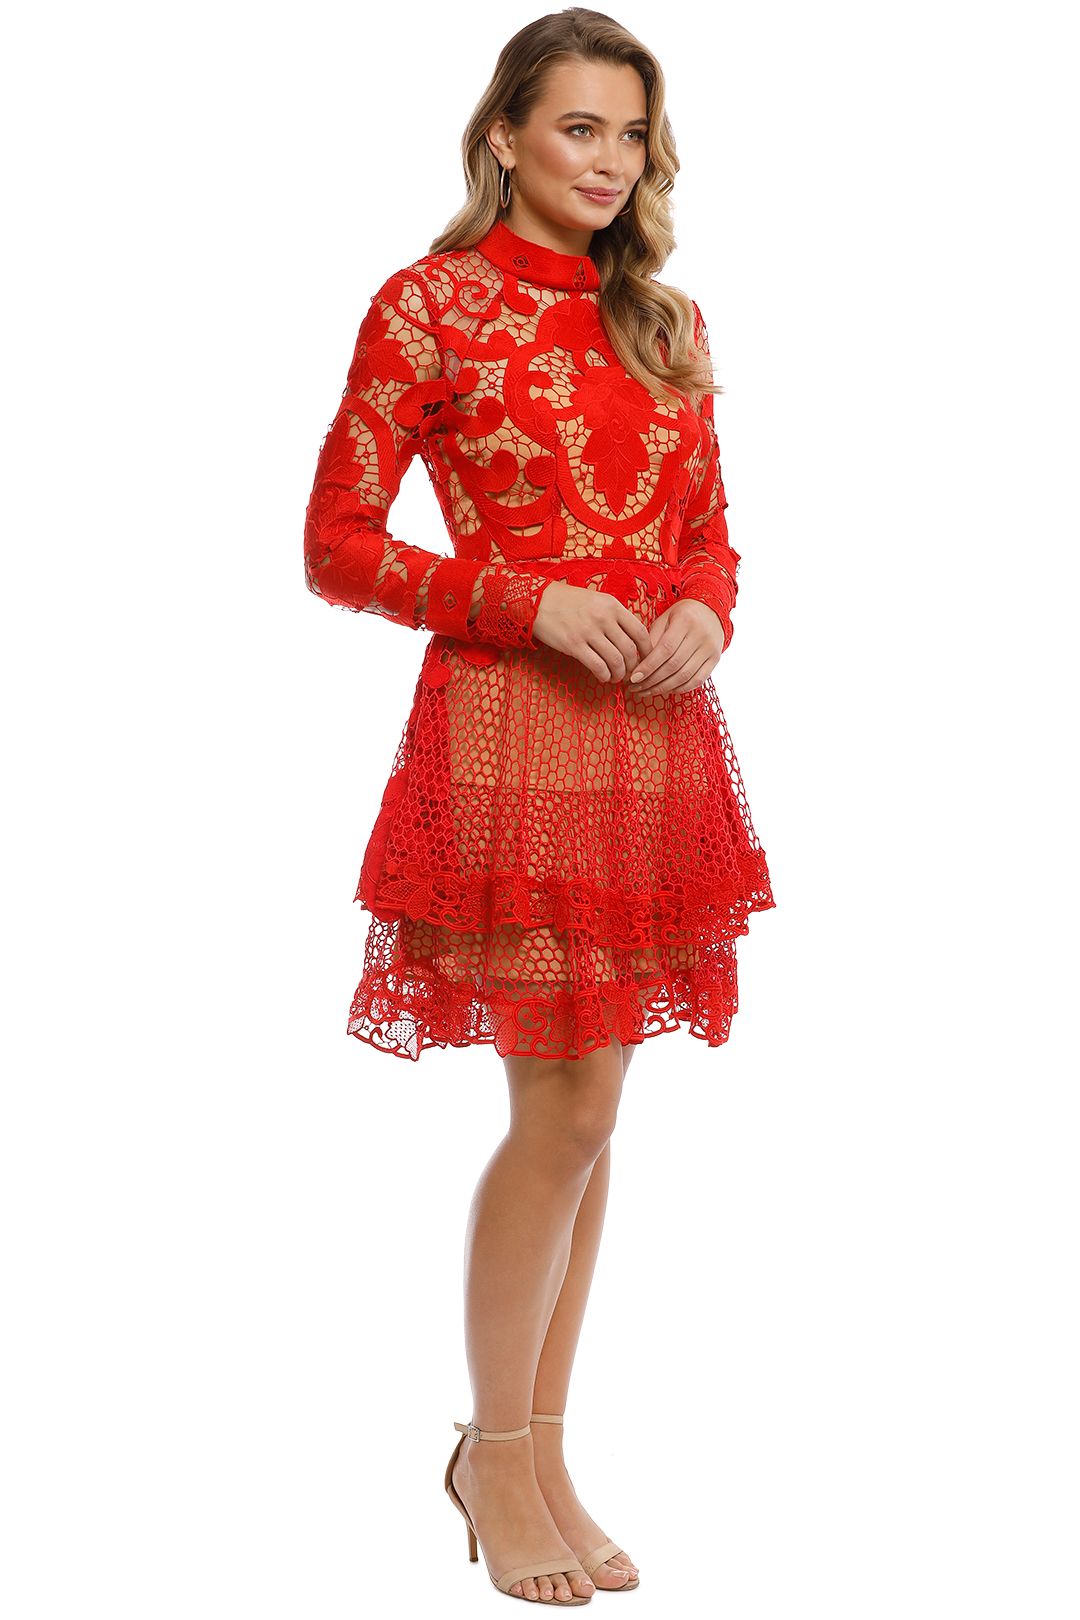 Thurley - Rose Ceremony Mini Dress - Red - side